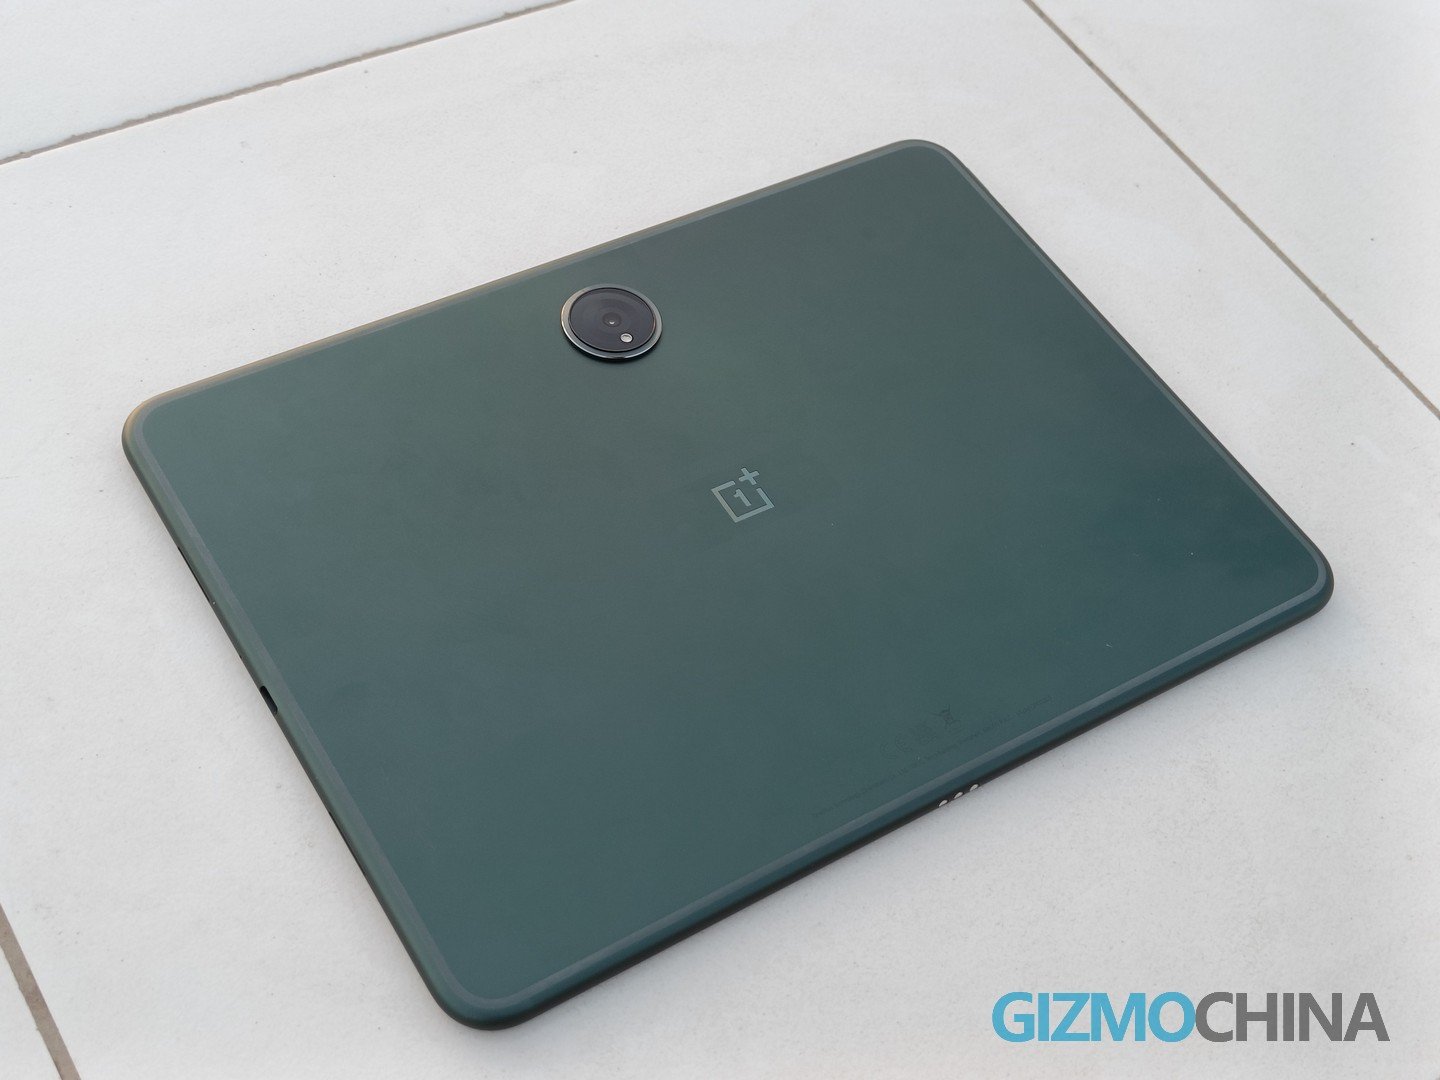 OnePlus Pad gets OxygenOS 14.0.0.500 update improving
battery life &amp; fixing the screen flickering issue